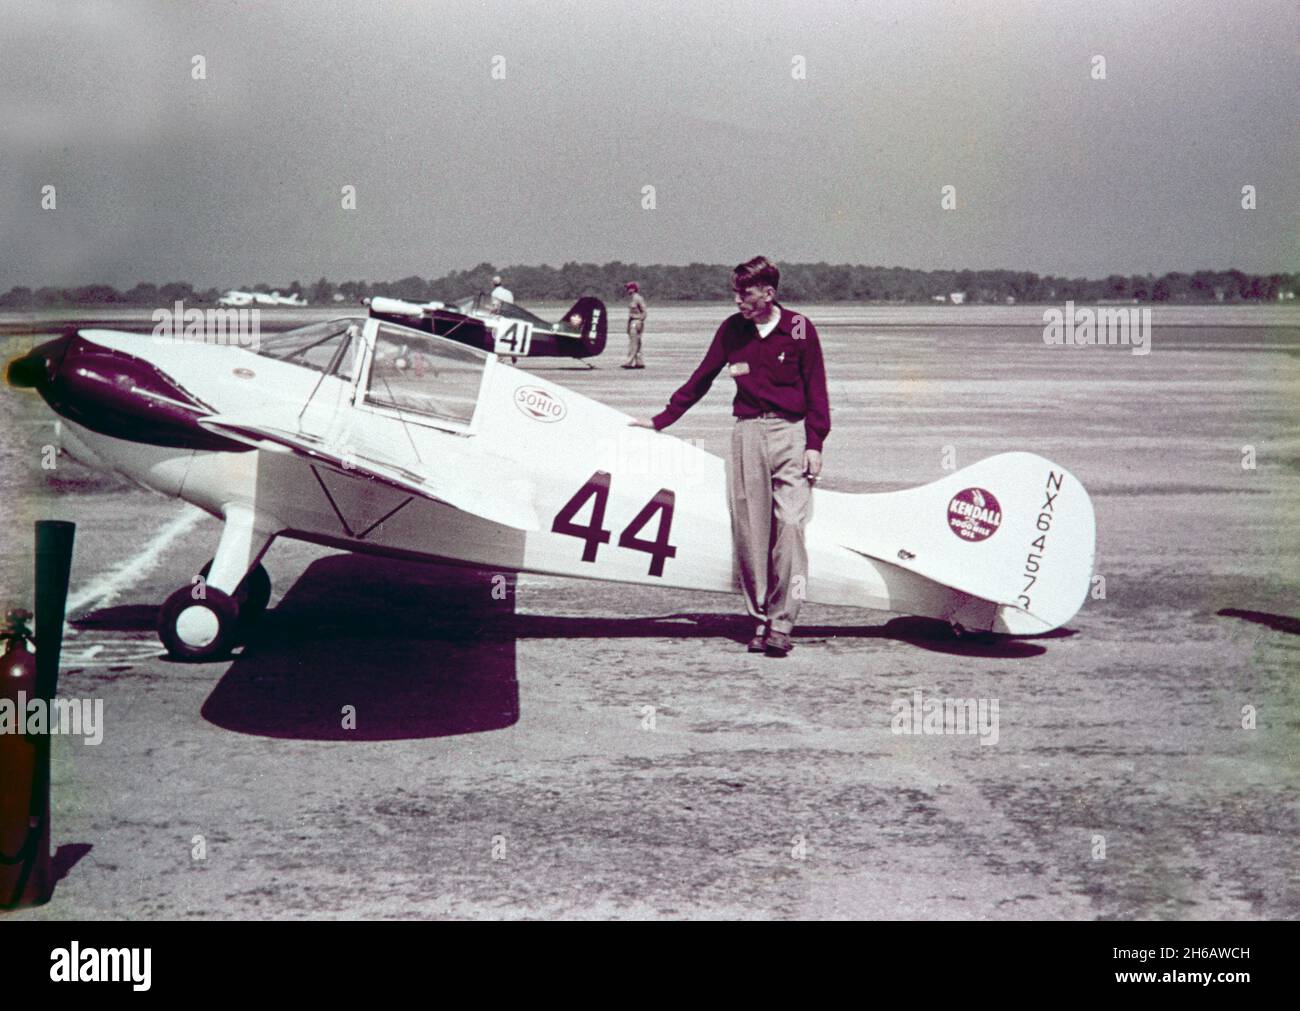 A rare colour vintage photograph taken in September 1948 at Cleveland, Ohio, USA. Photo shows an aircraft at an Airshow or Air Race. A Loose  Townsend Special midget racer, serial number NX64573. Stock Photo